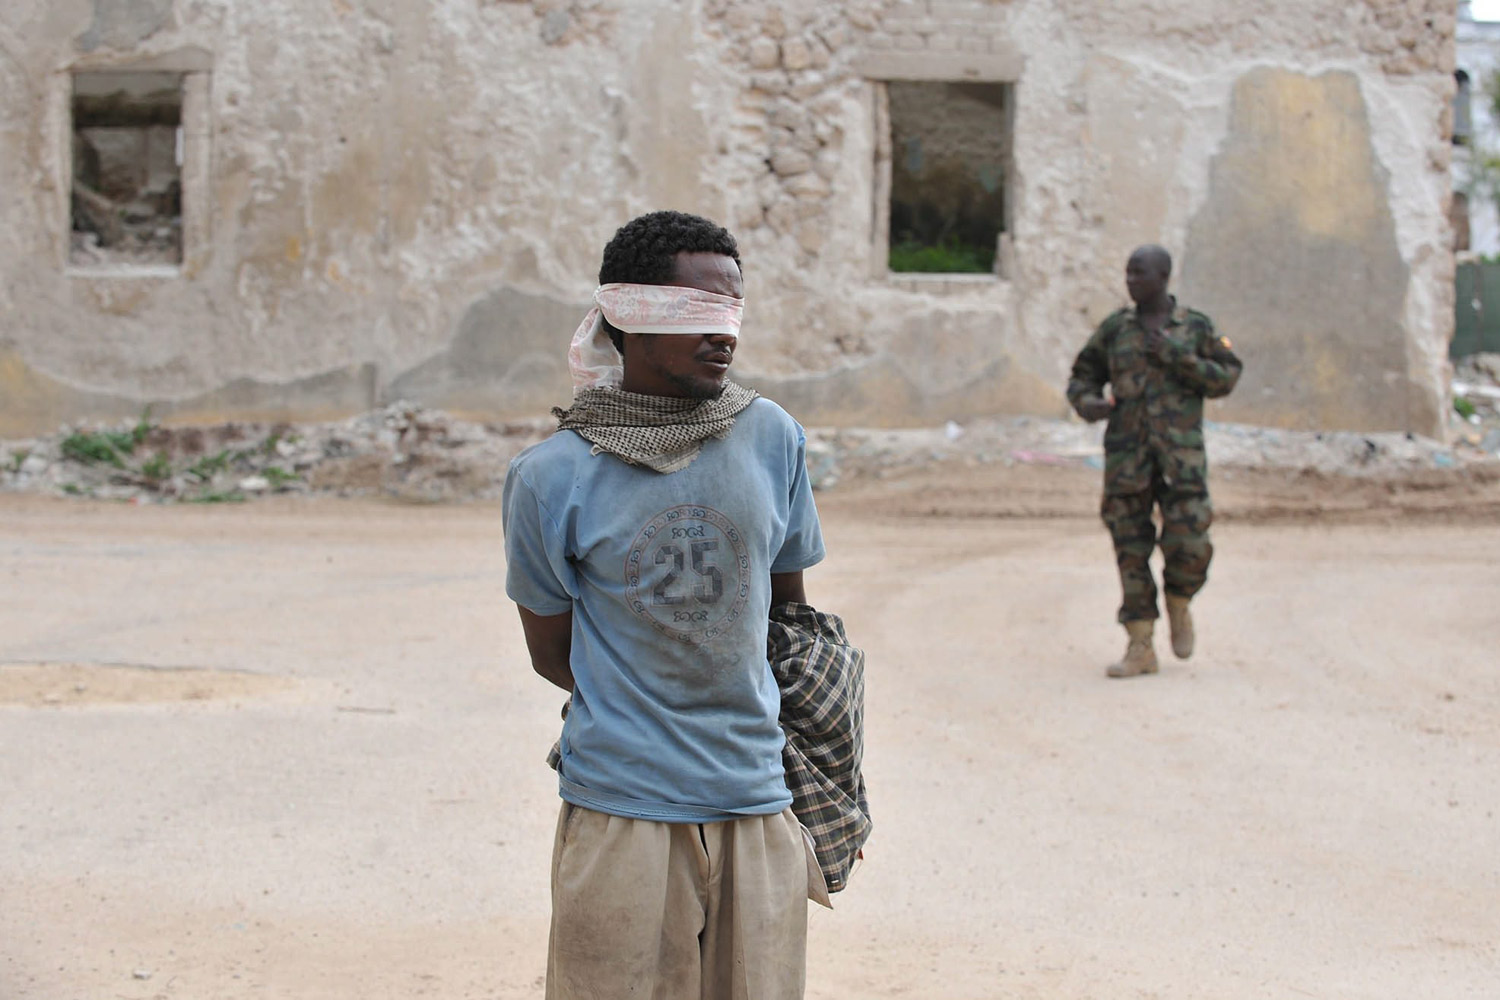 August 6, 2011. A suspected rebel member of Al-Shabab was captured by Amisom (African mission in Somalia) in Mogadishu shortly after the militant group withdrew from the last four districts that they held after heavy fighting through out the night, Somalia. Reports state that the conflict has hindered aid efforts in the famine-hit country, with the militia barring some aid agencies from central and southern areas it controls.